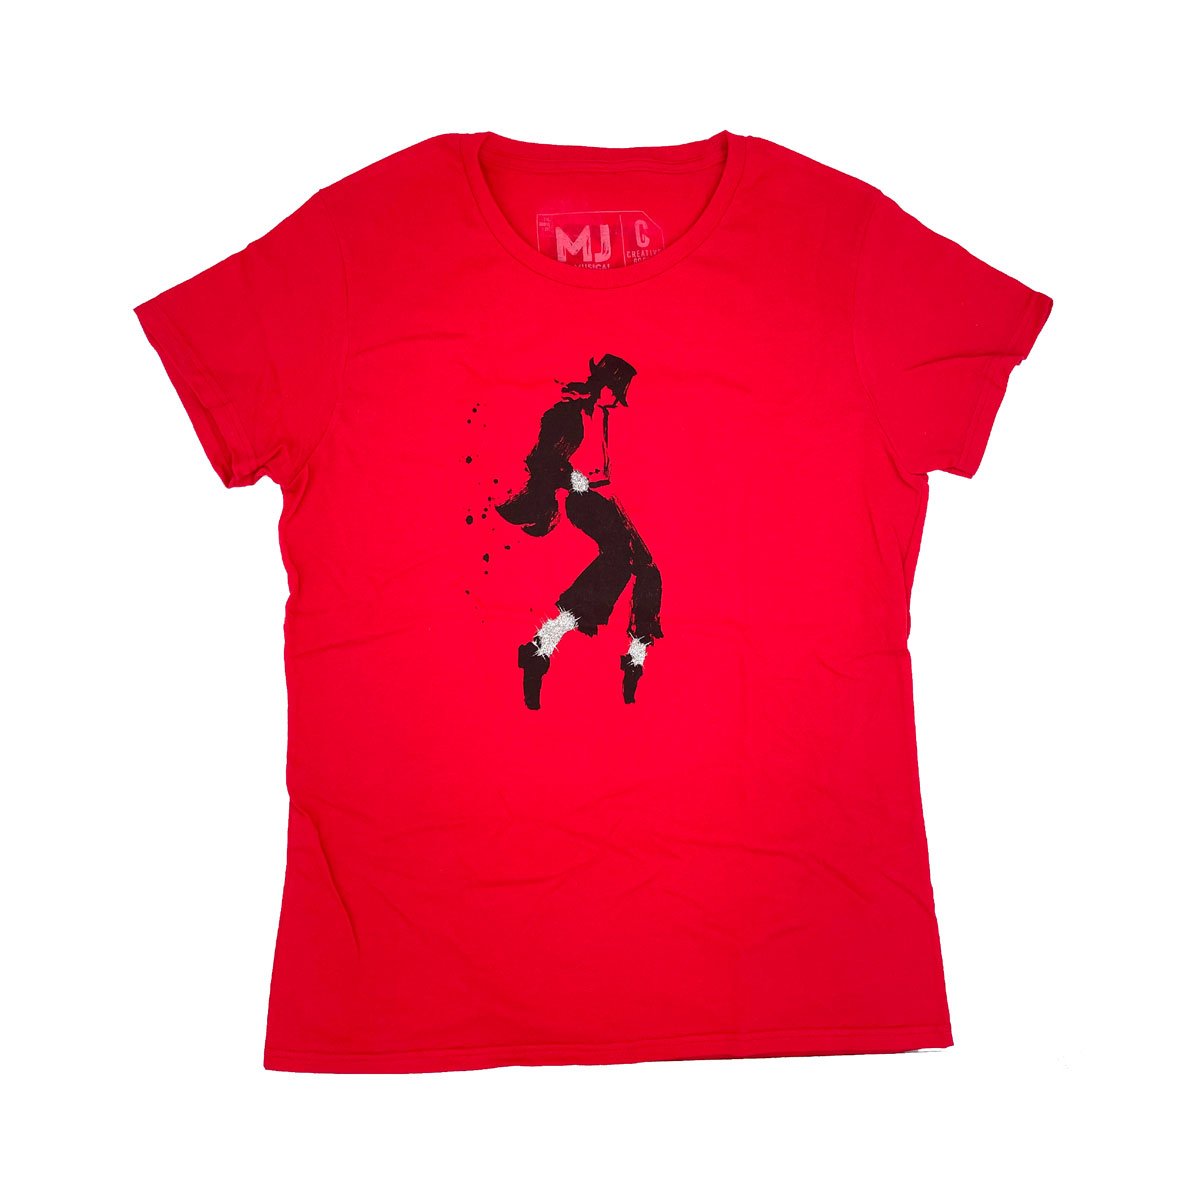 MJ THE MUSICAL Fitted Logo Tee - Red Image